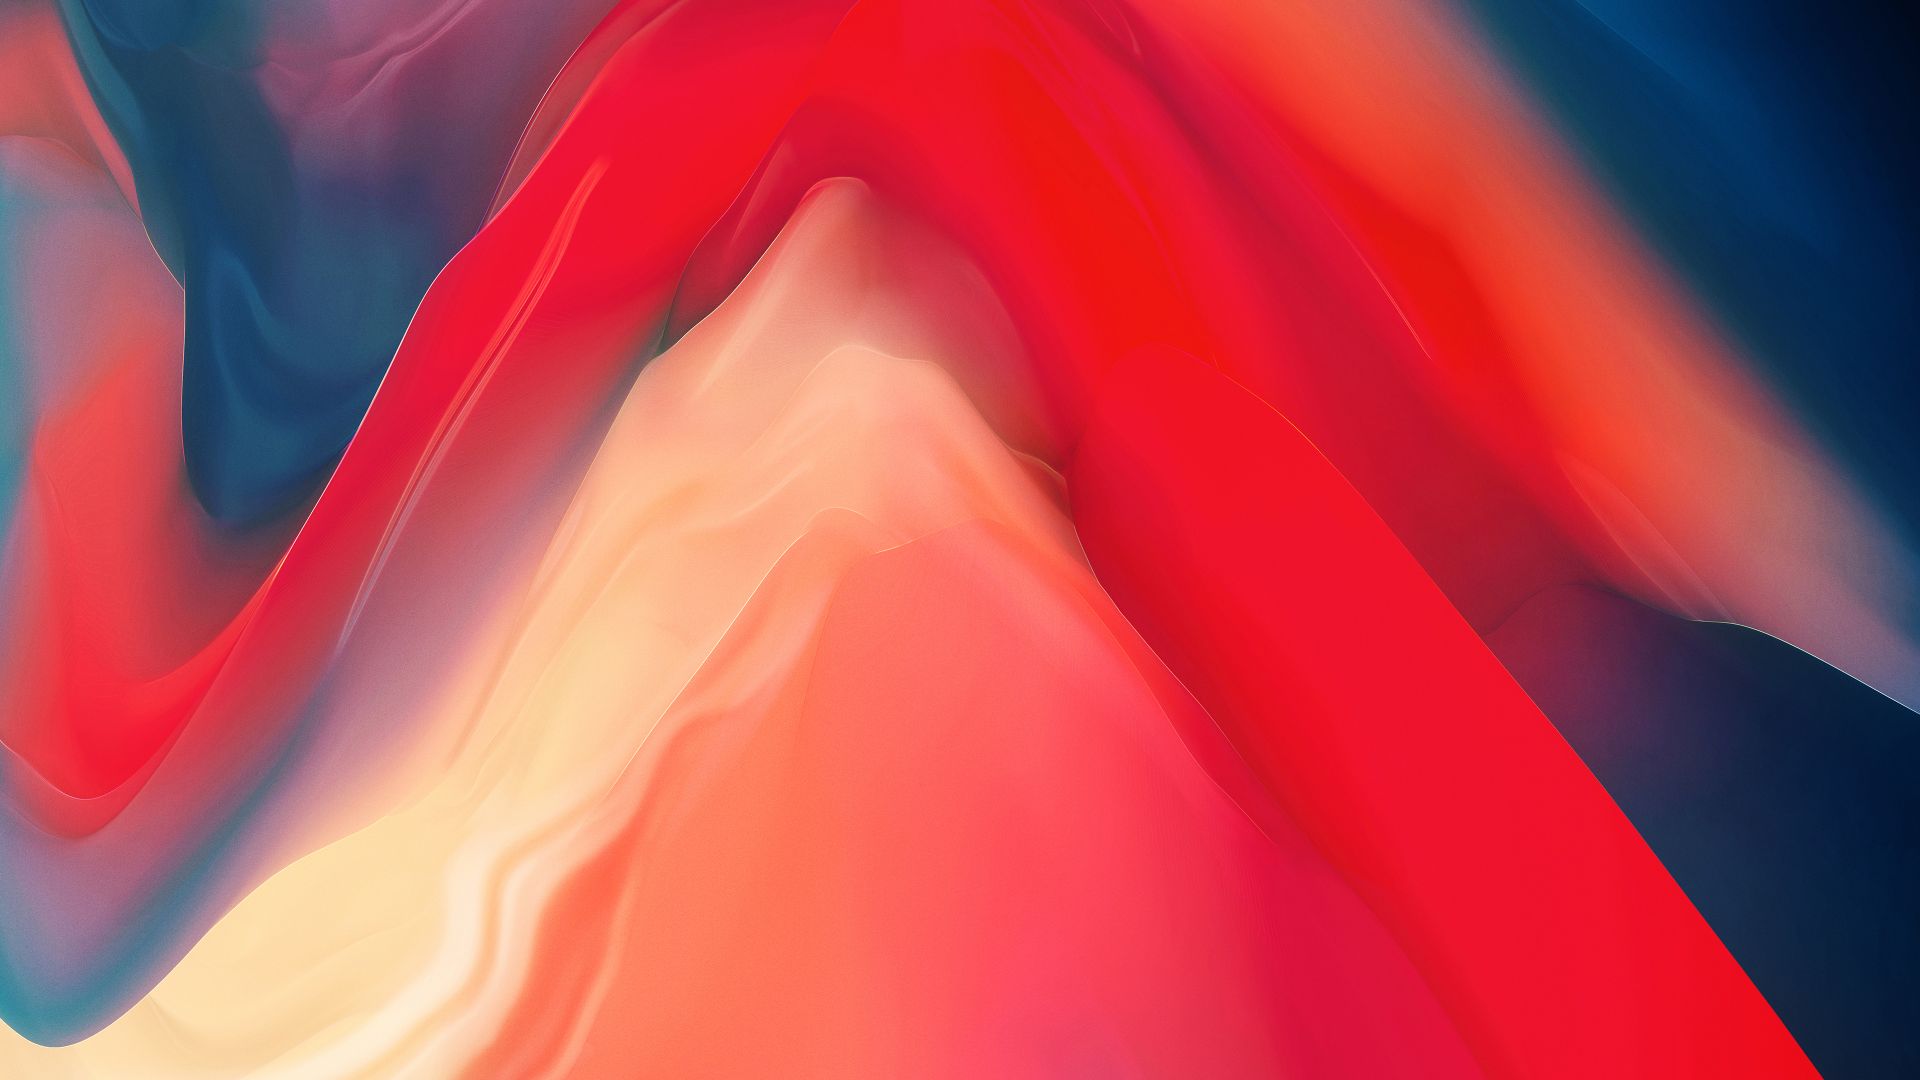 abstract, OnePlus 6T, 4K (horizontal)